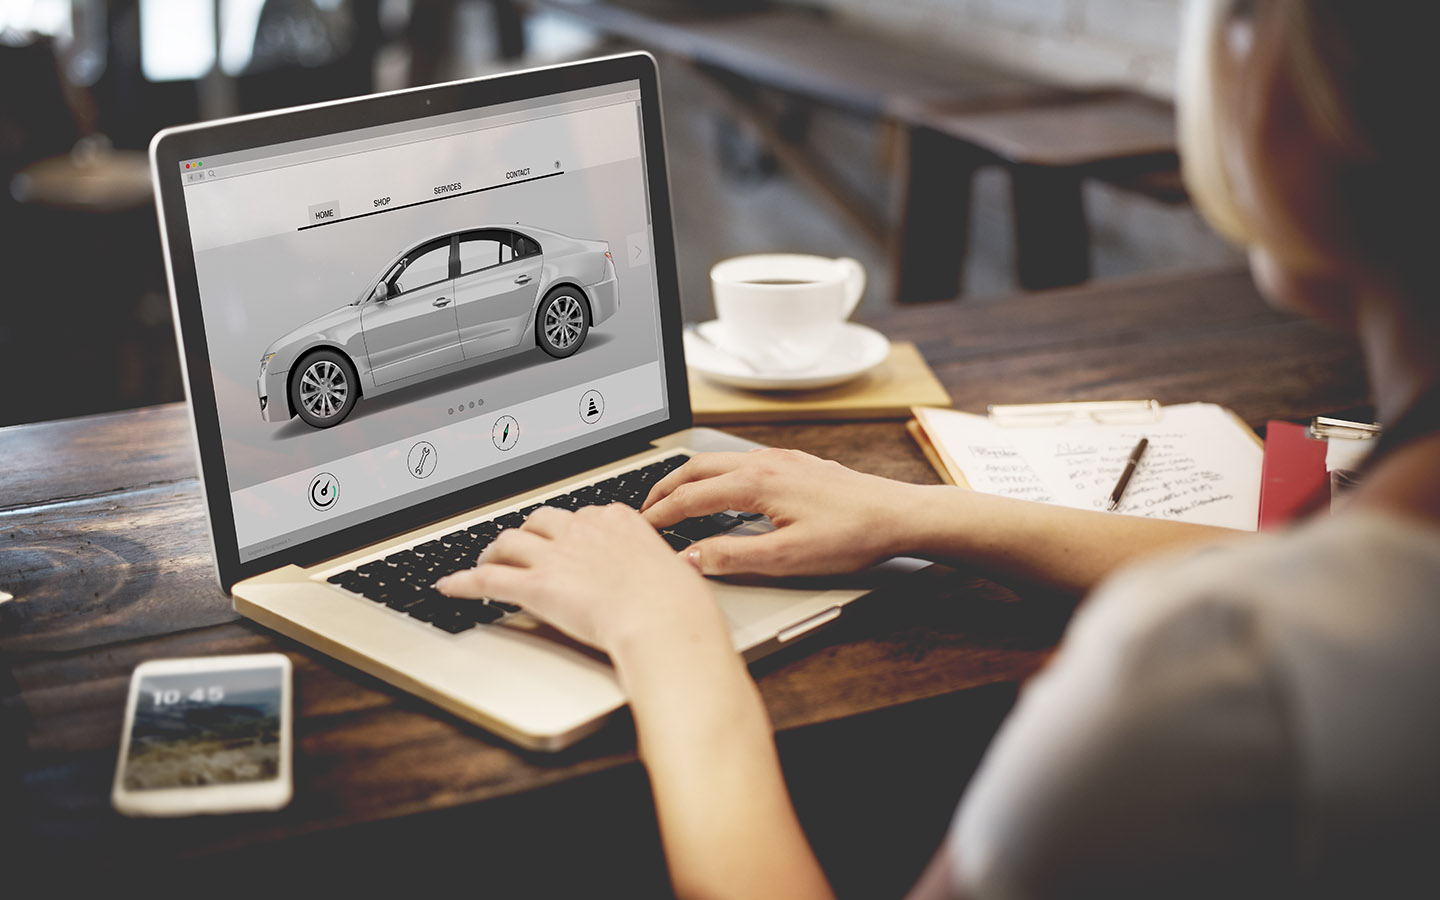 Use online platforms to sell your non-running vehicle